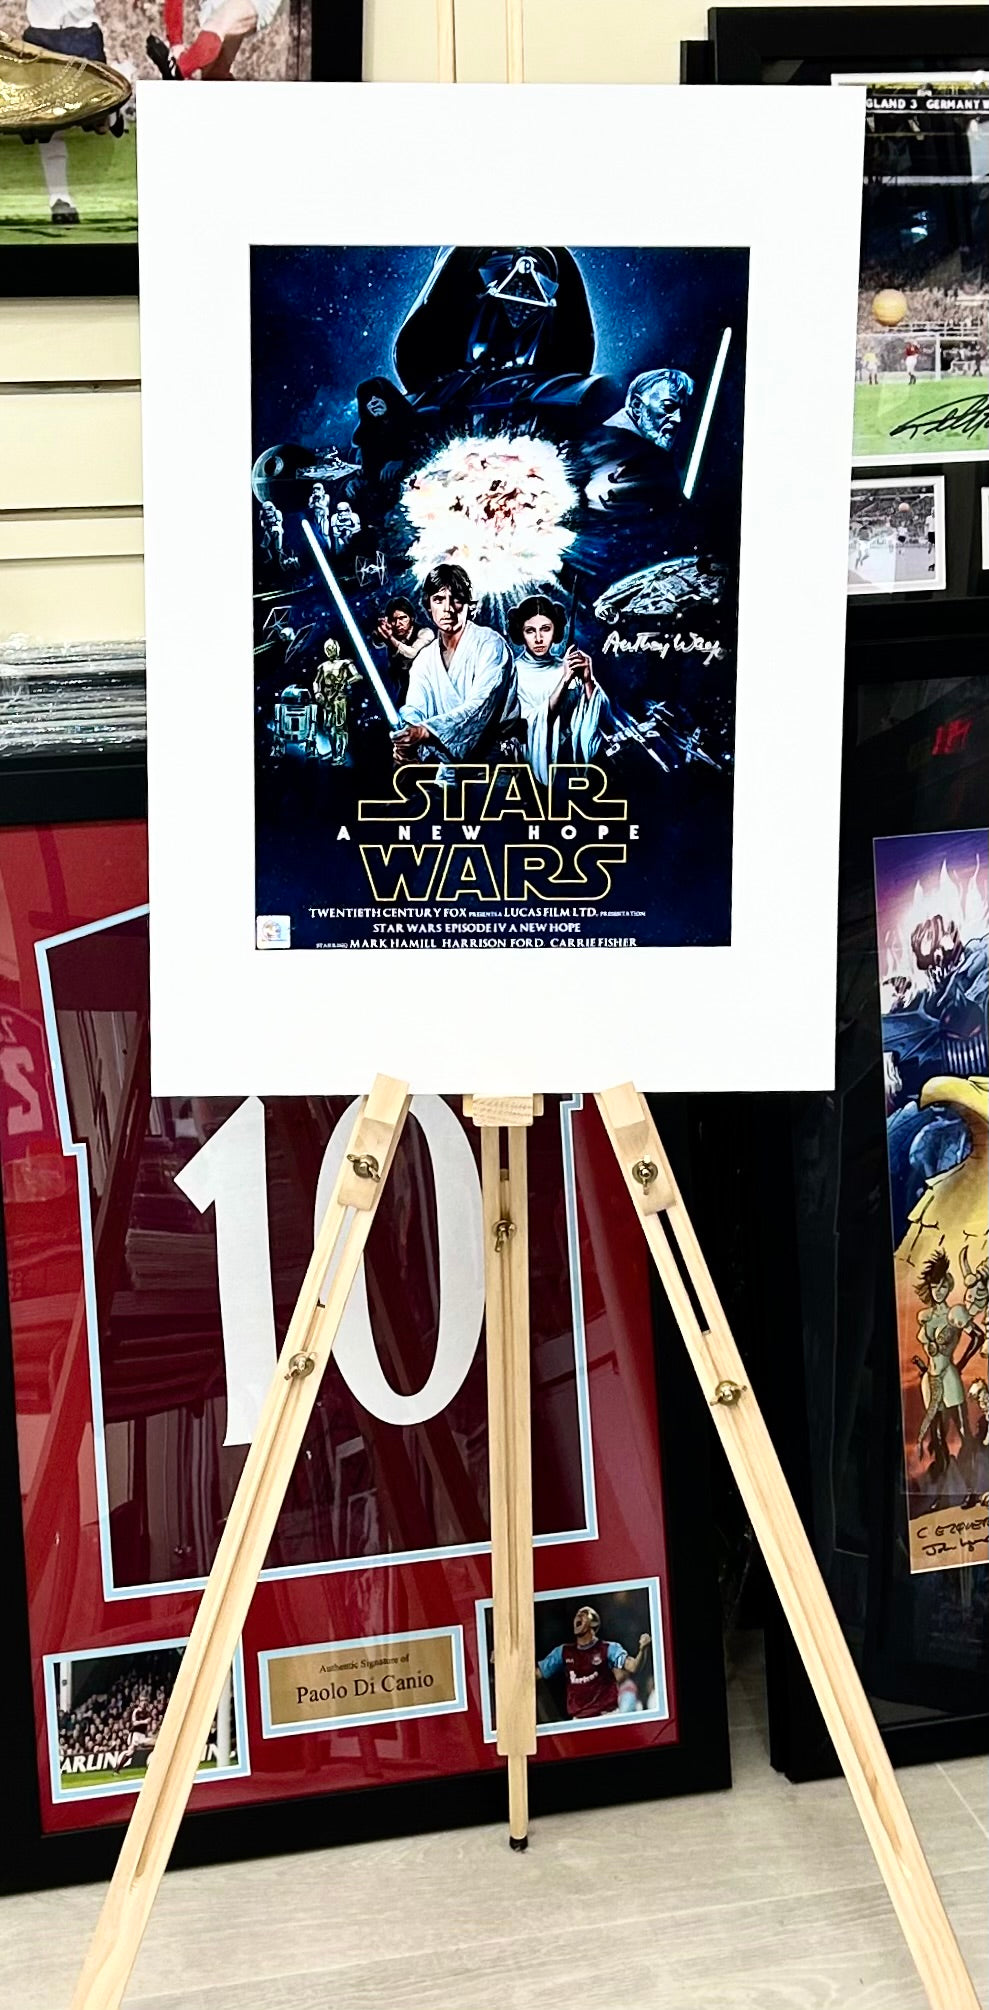 Star Wars (1977) Anthony Waye Autographed Film Poster with Triple Layer Authenticity